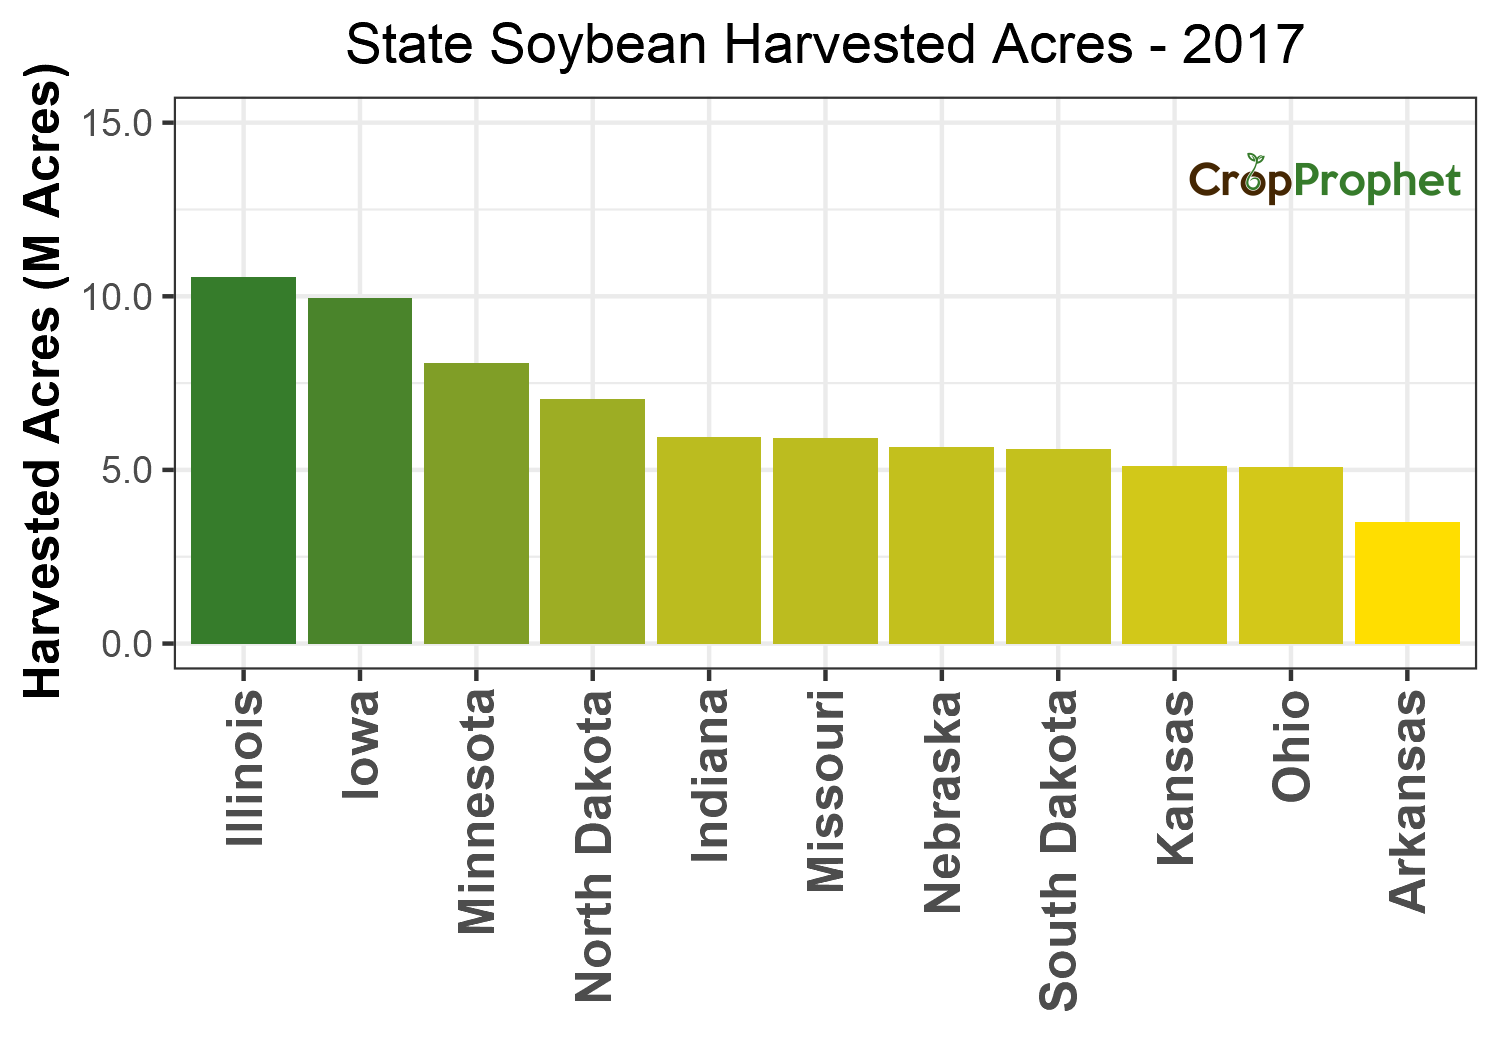 Soybean Harvested Acres by State - 2017 Rankings